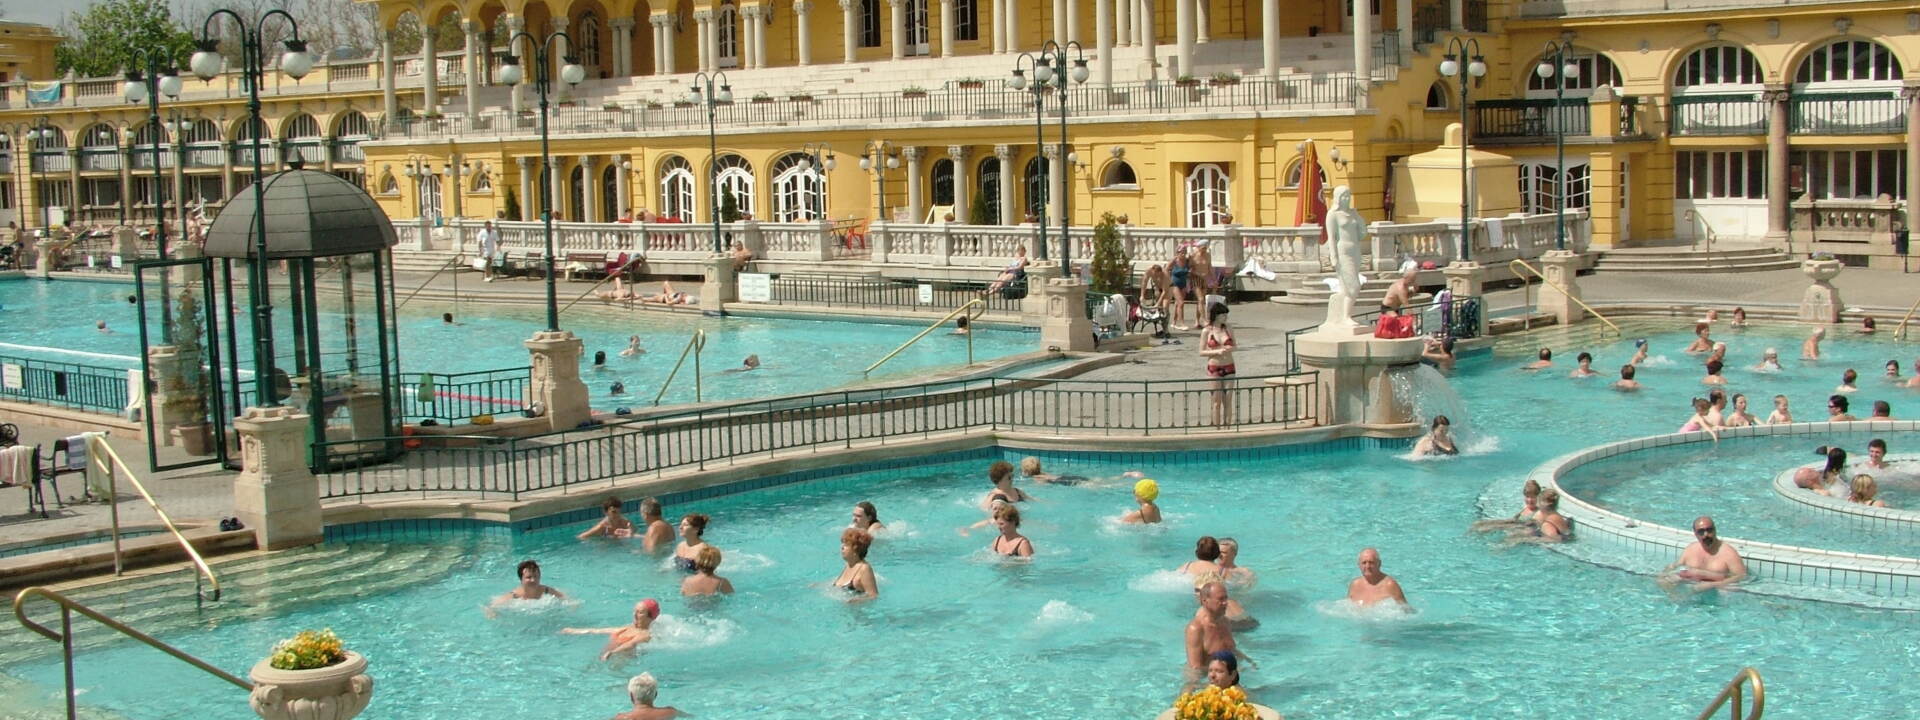 Gellért Thermal Bath - exterior view and outdoor pool © Budapest Spas